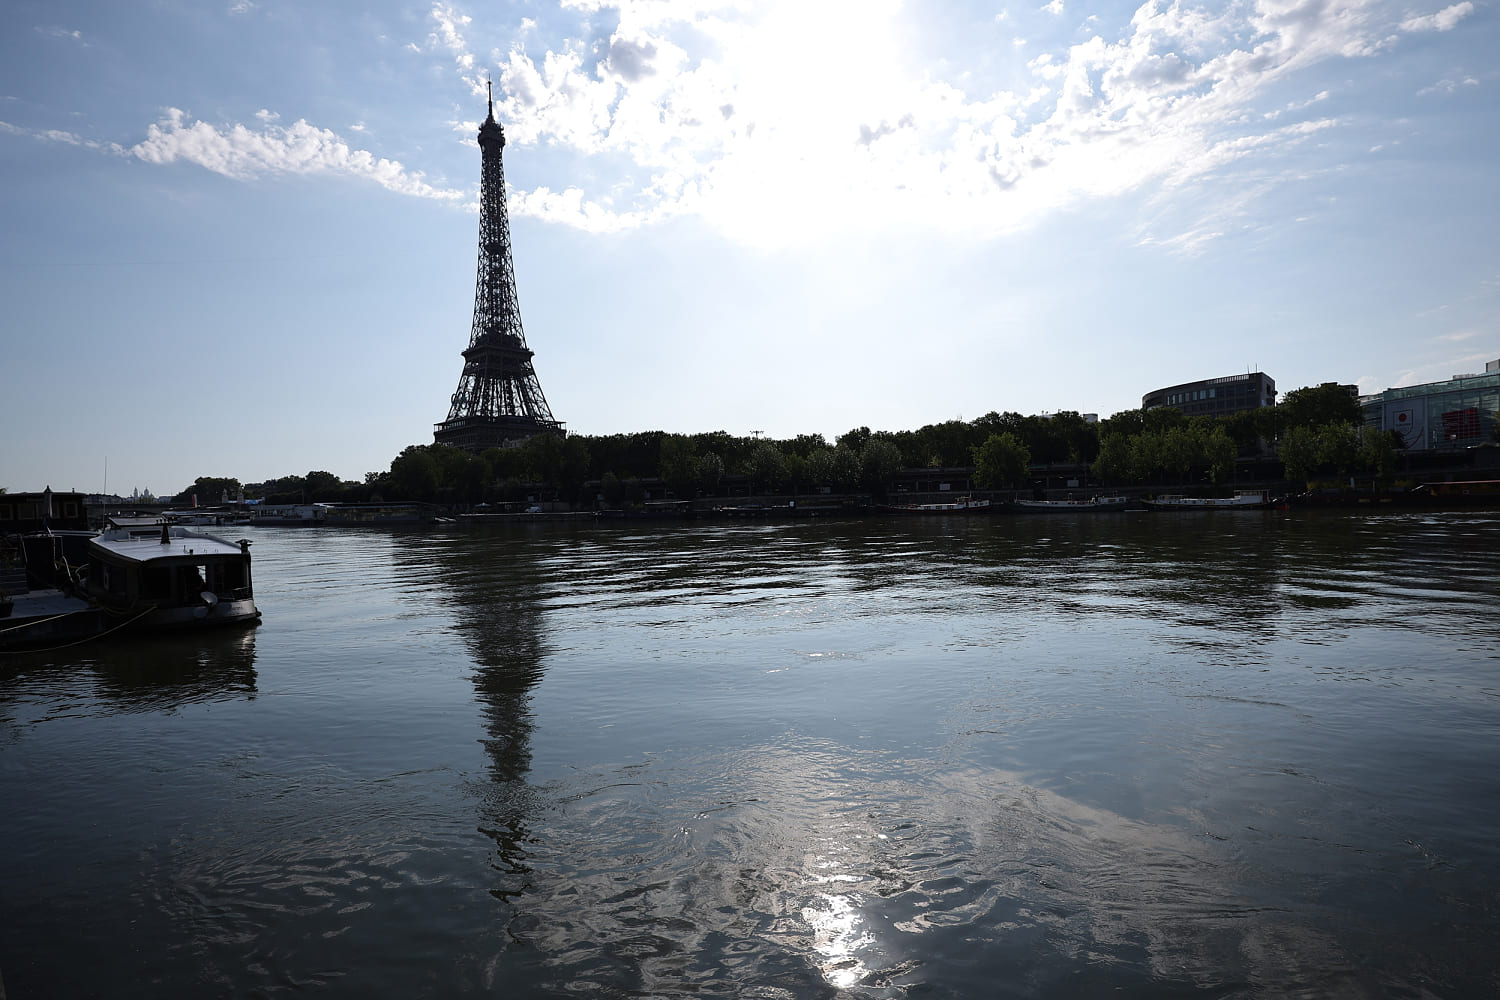 Men’s Olympic triathlon postponed as Seine remains too contaminated for safe swimming